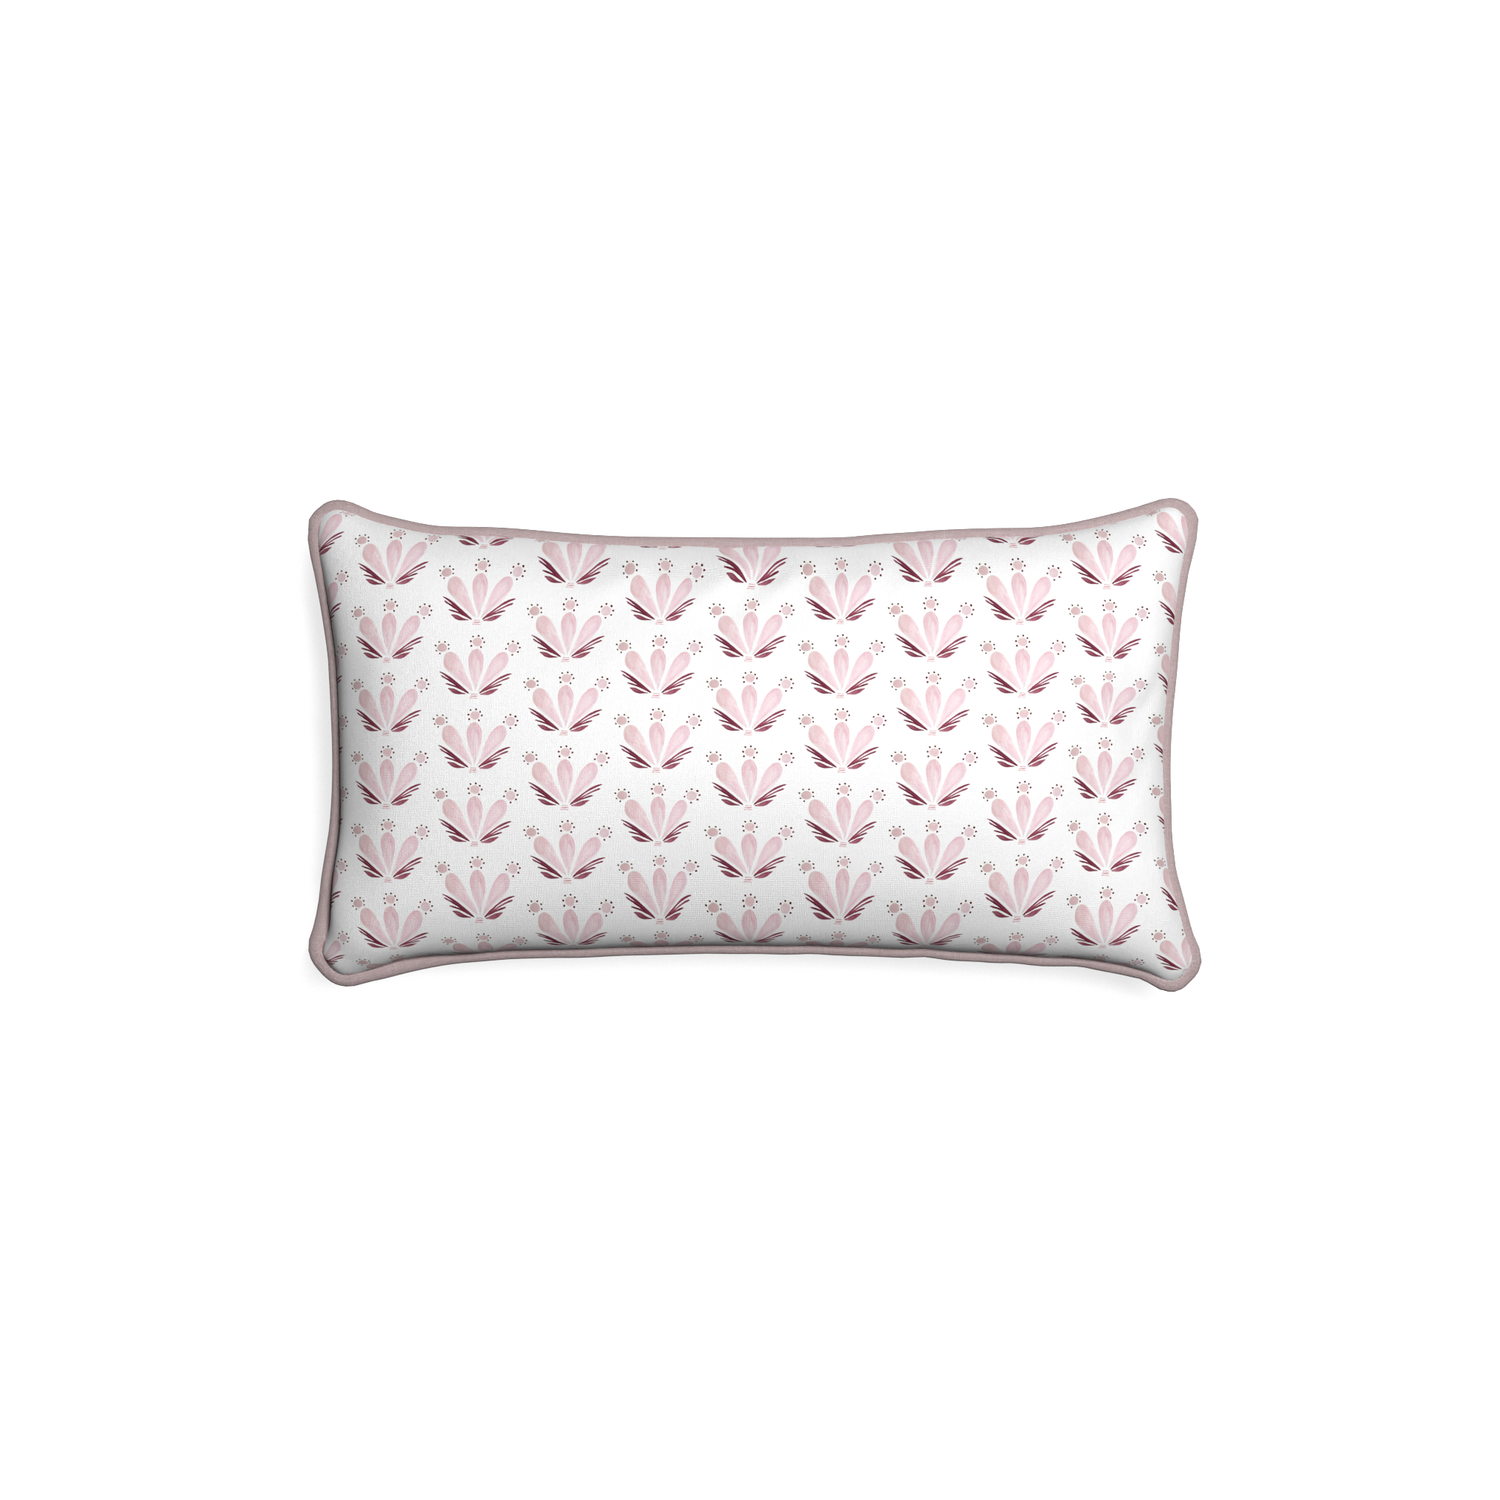 Petite-lumbar serena pink custom pink & burgundy drop repeat floralpillow with orchid piping on white background